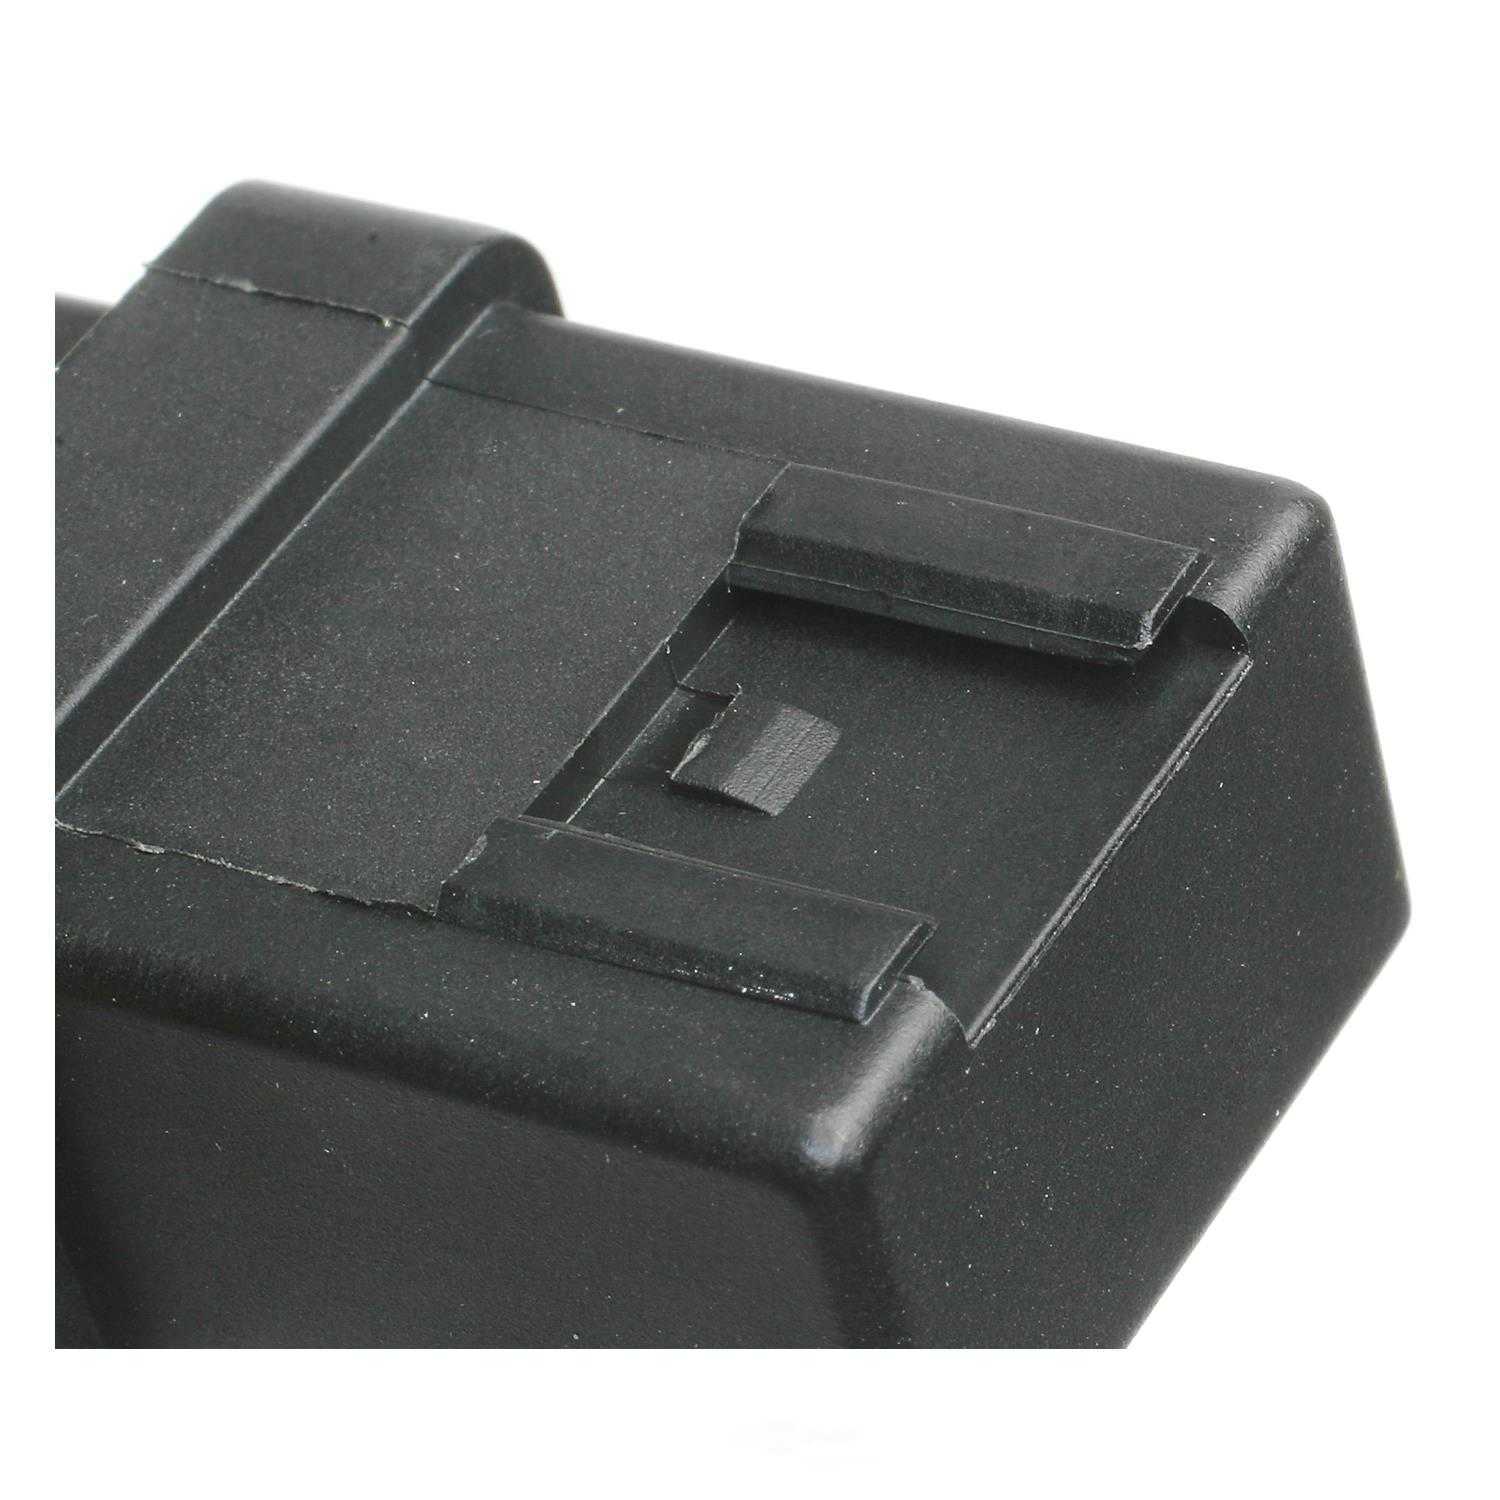 STANDARD MOTOR PRODUCTS - Accessory Power Relay - STA RY-209